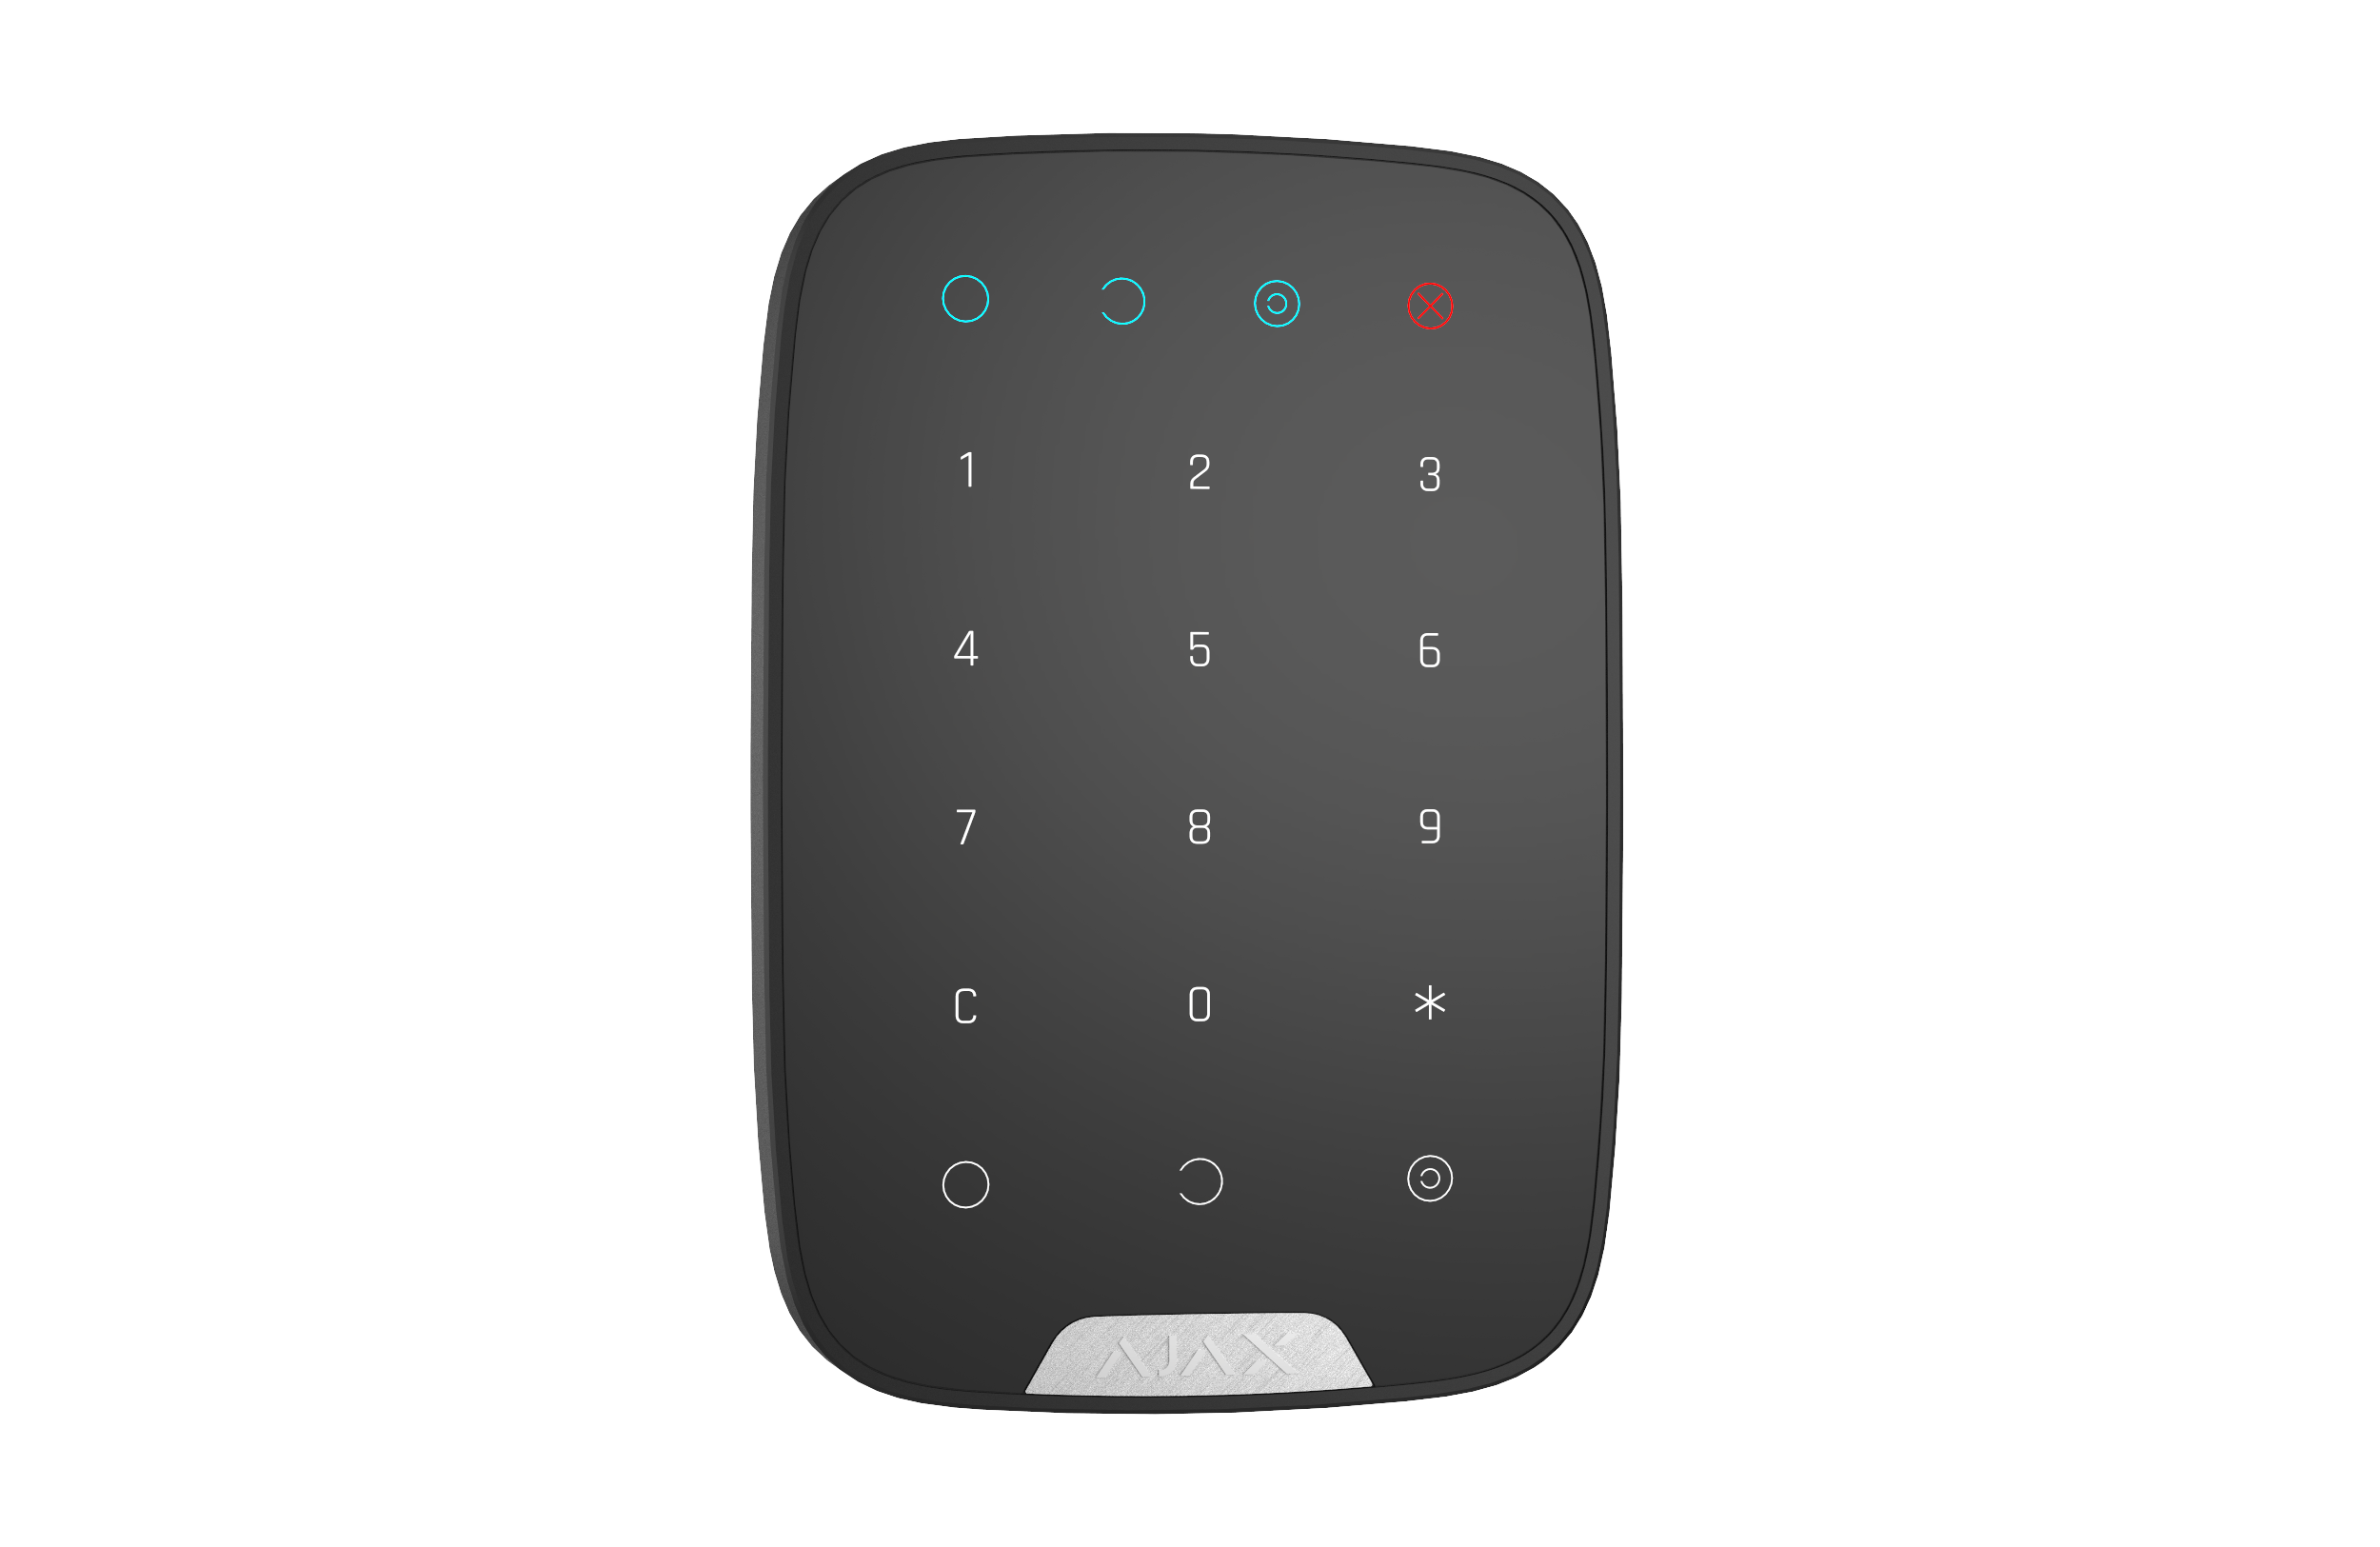 Ajax Products | Wireless alarm system and smart home